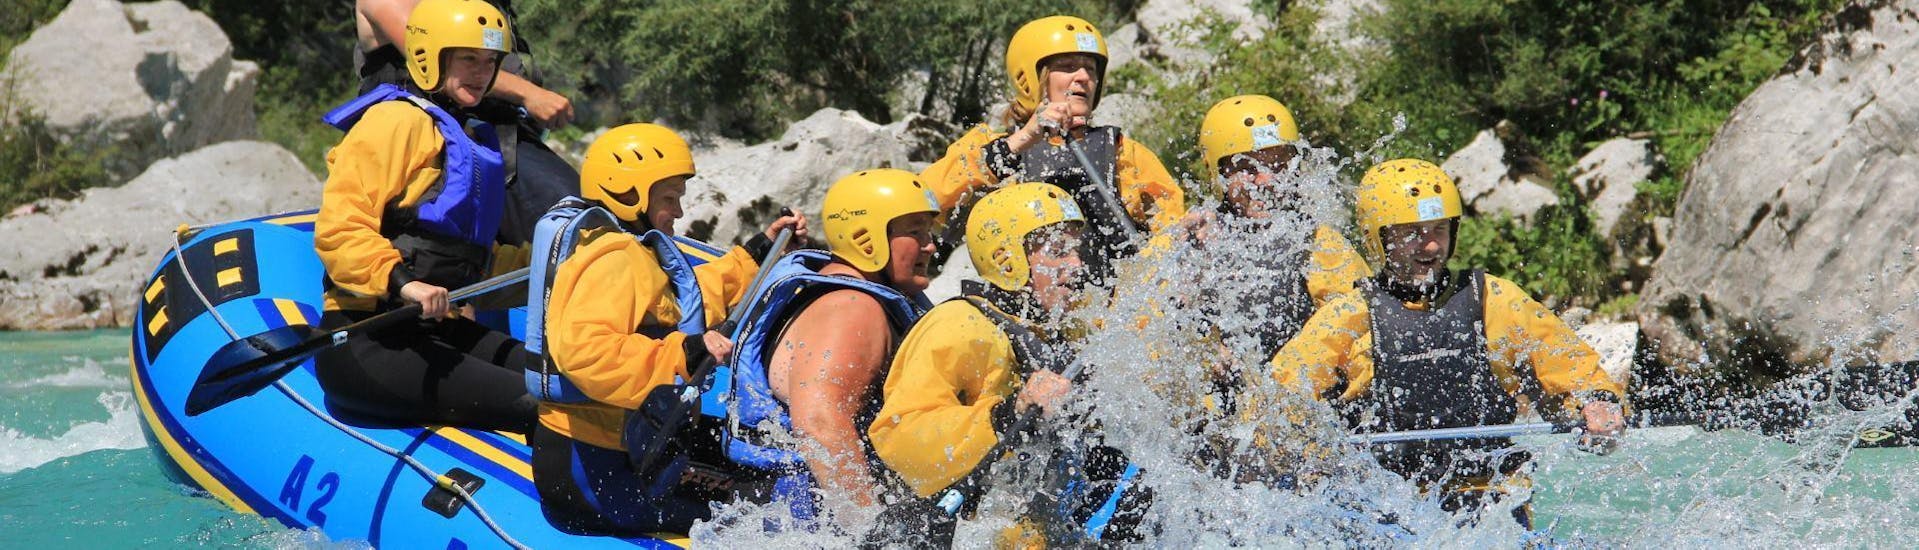 A group in the boat during the private rafting on the Soča River for families & groups with A2 Rafting Kobarid.